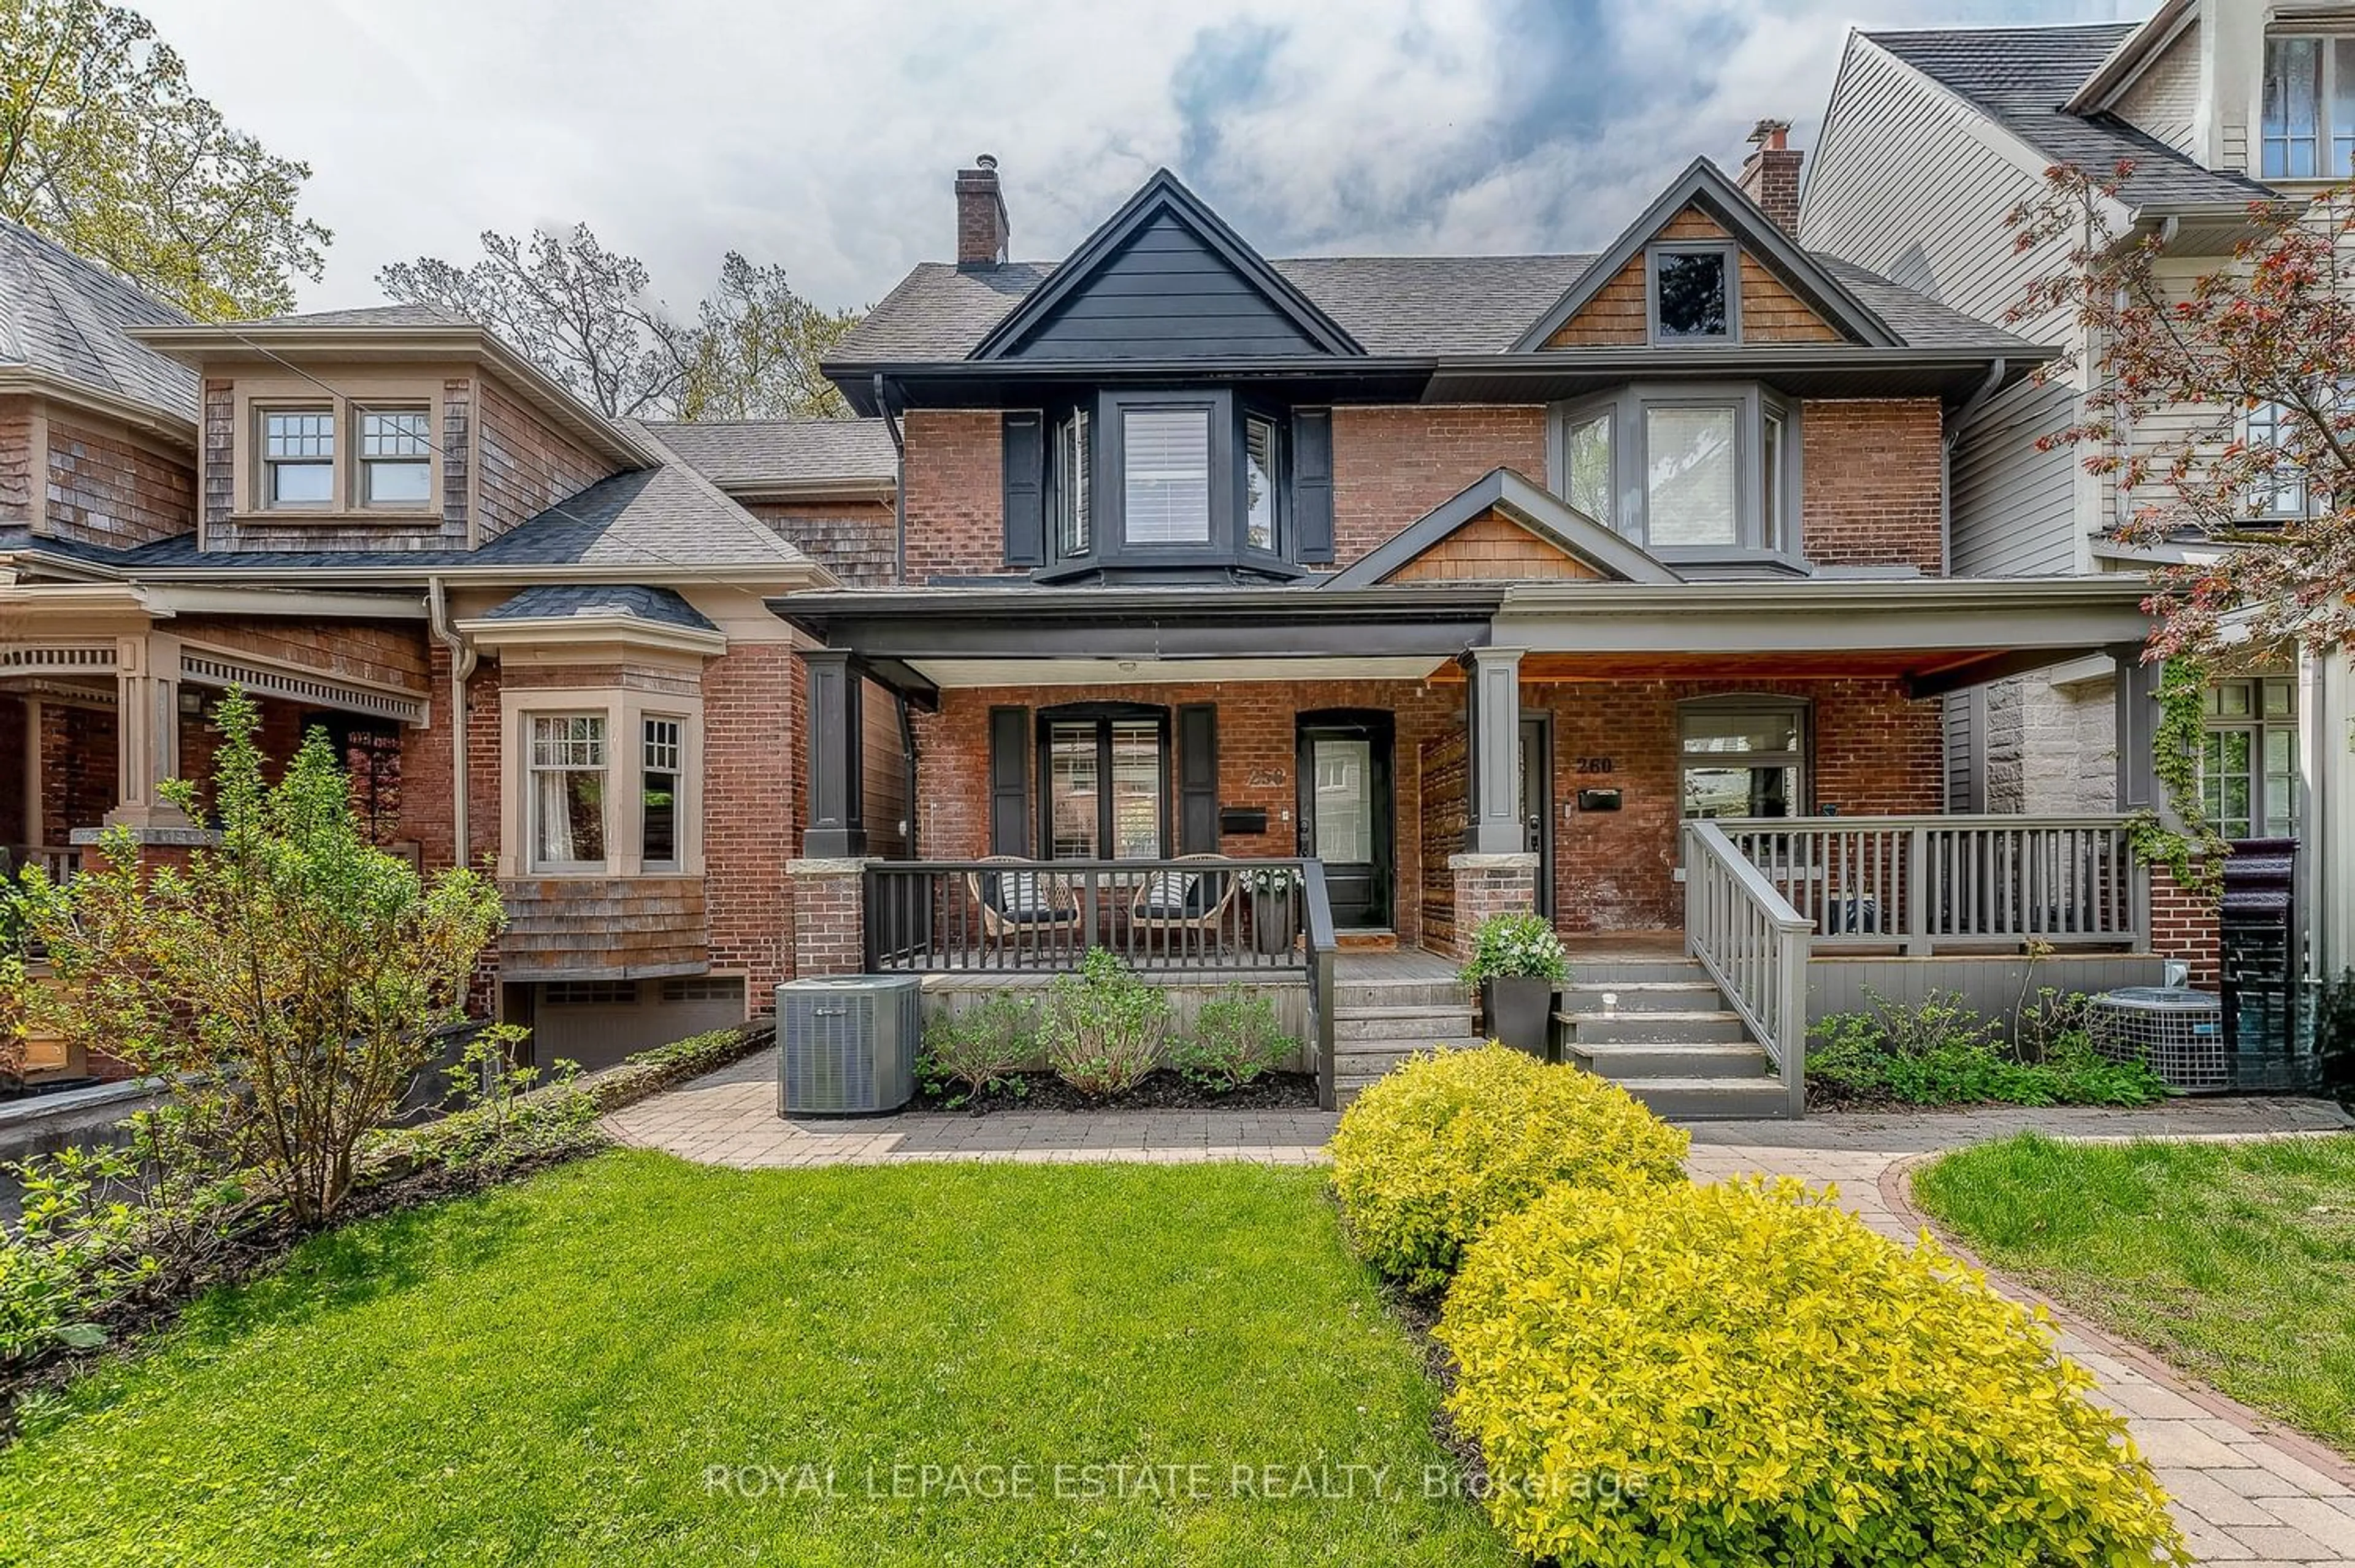 Home with brick exterior material for 258 Willow Ave, Toronto Ontario M4E 3K7